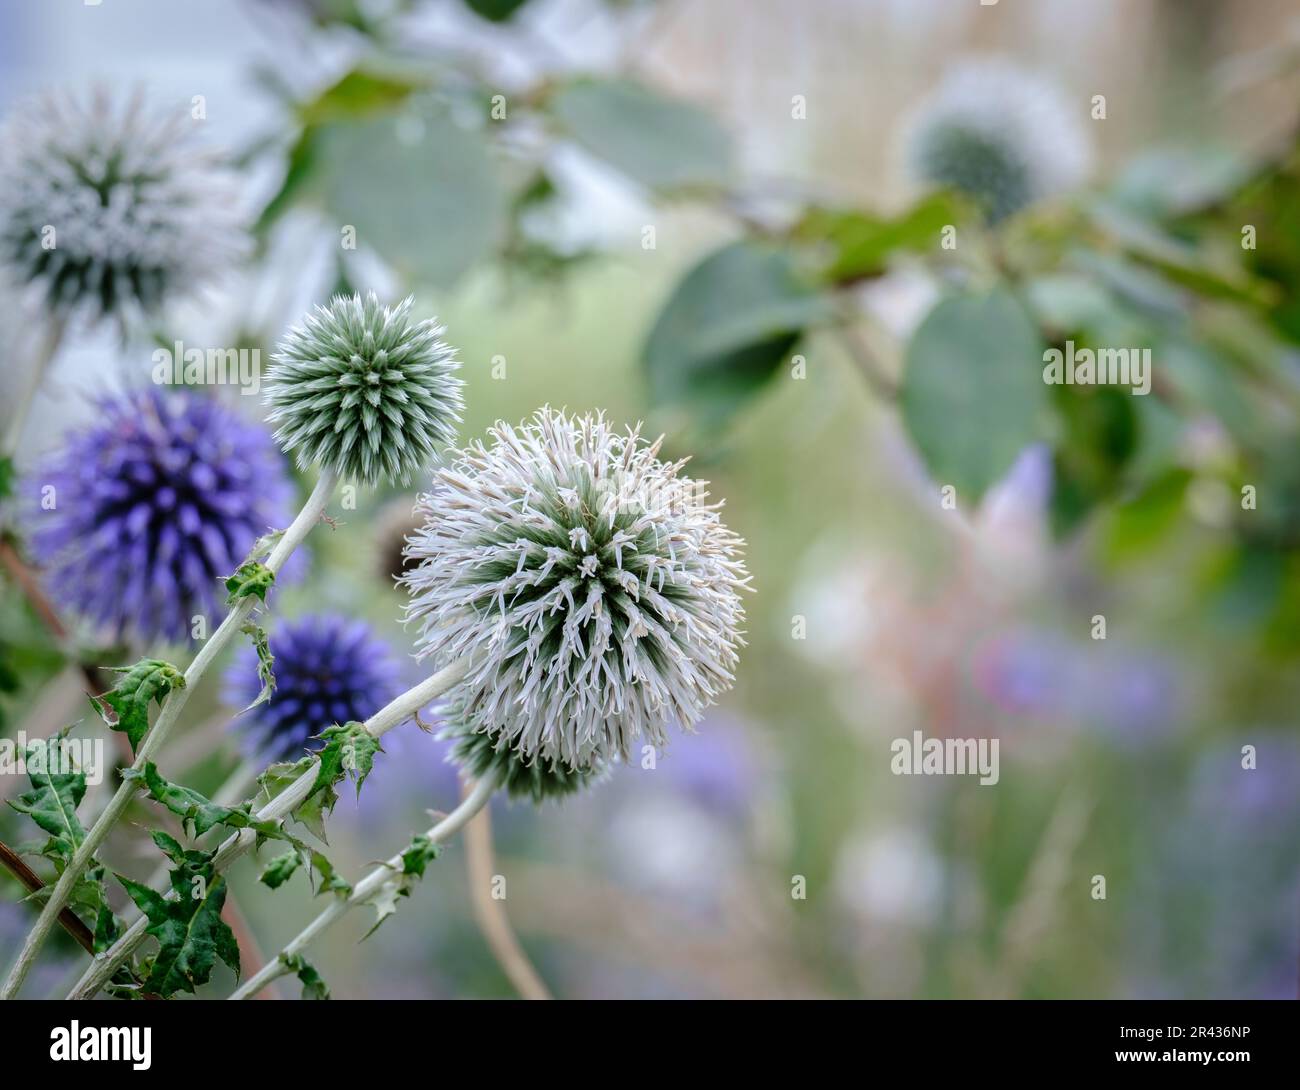 Close up of Echinops or globe thistle, flowering plant with blurred background. Stock Photo